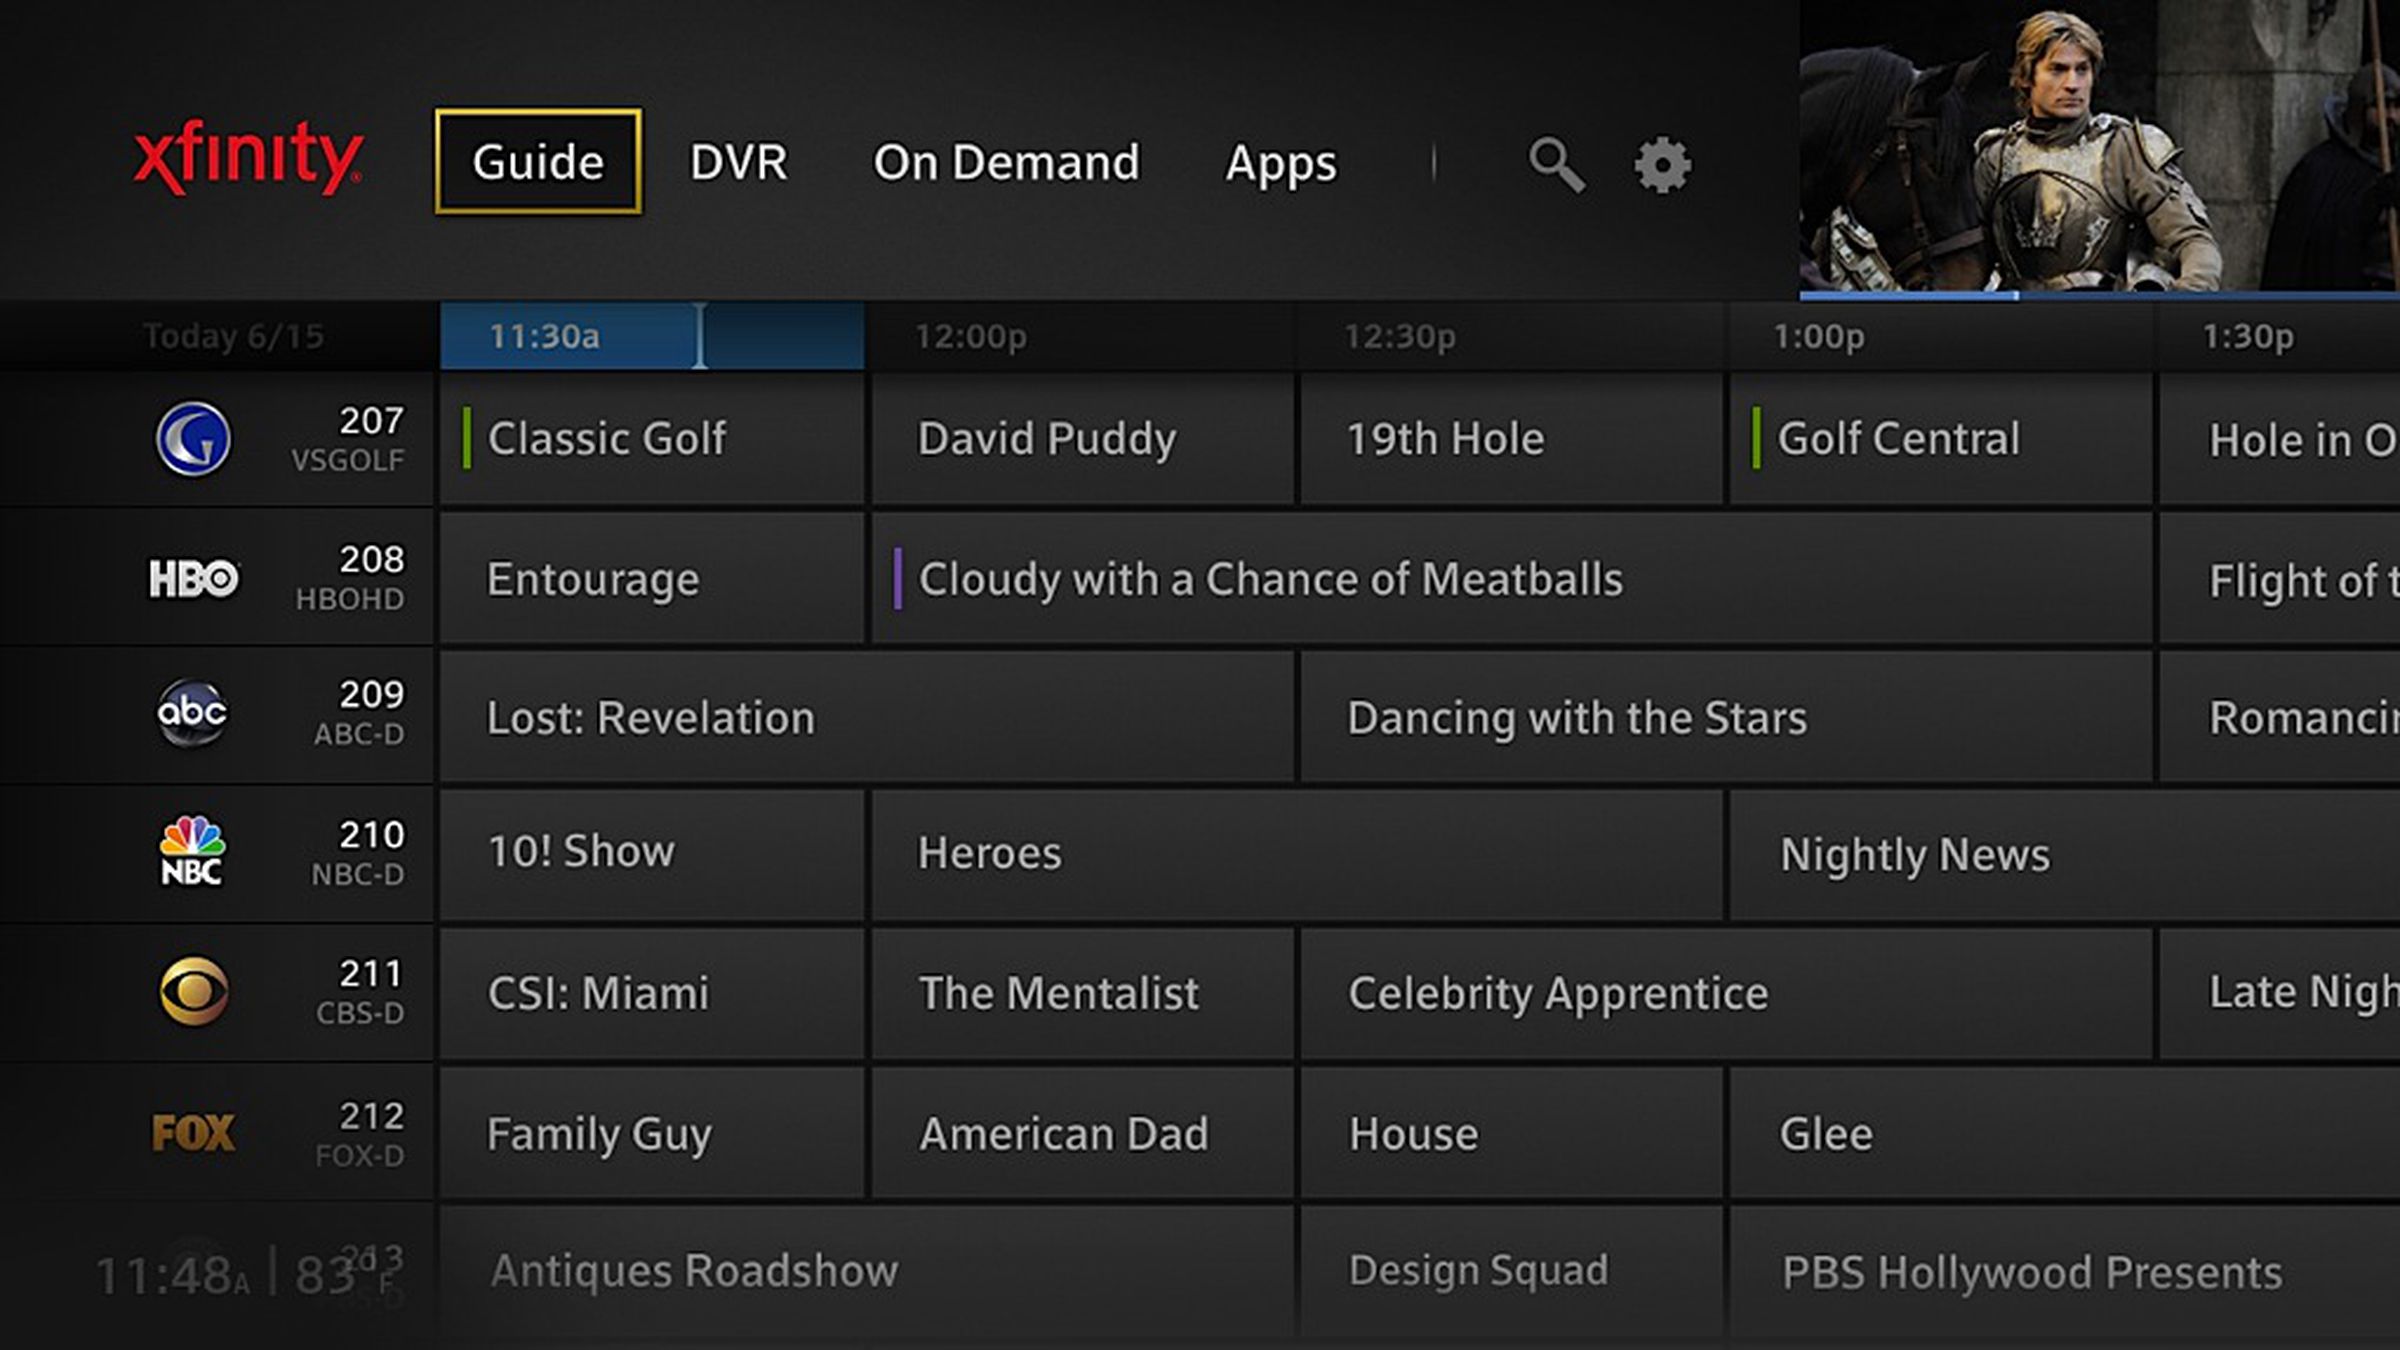 Gallery: Comcast X1 UI with apps and remote